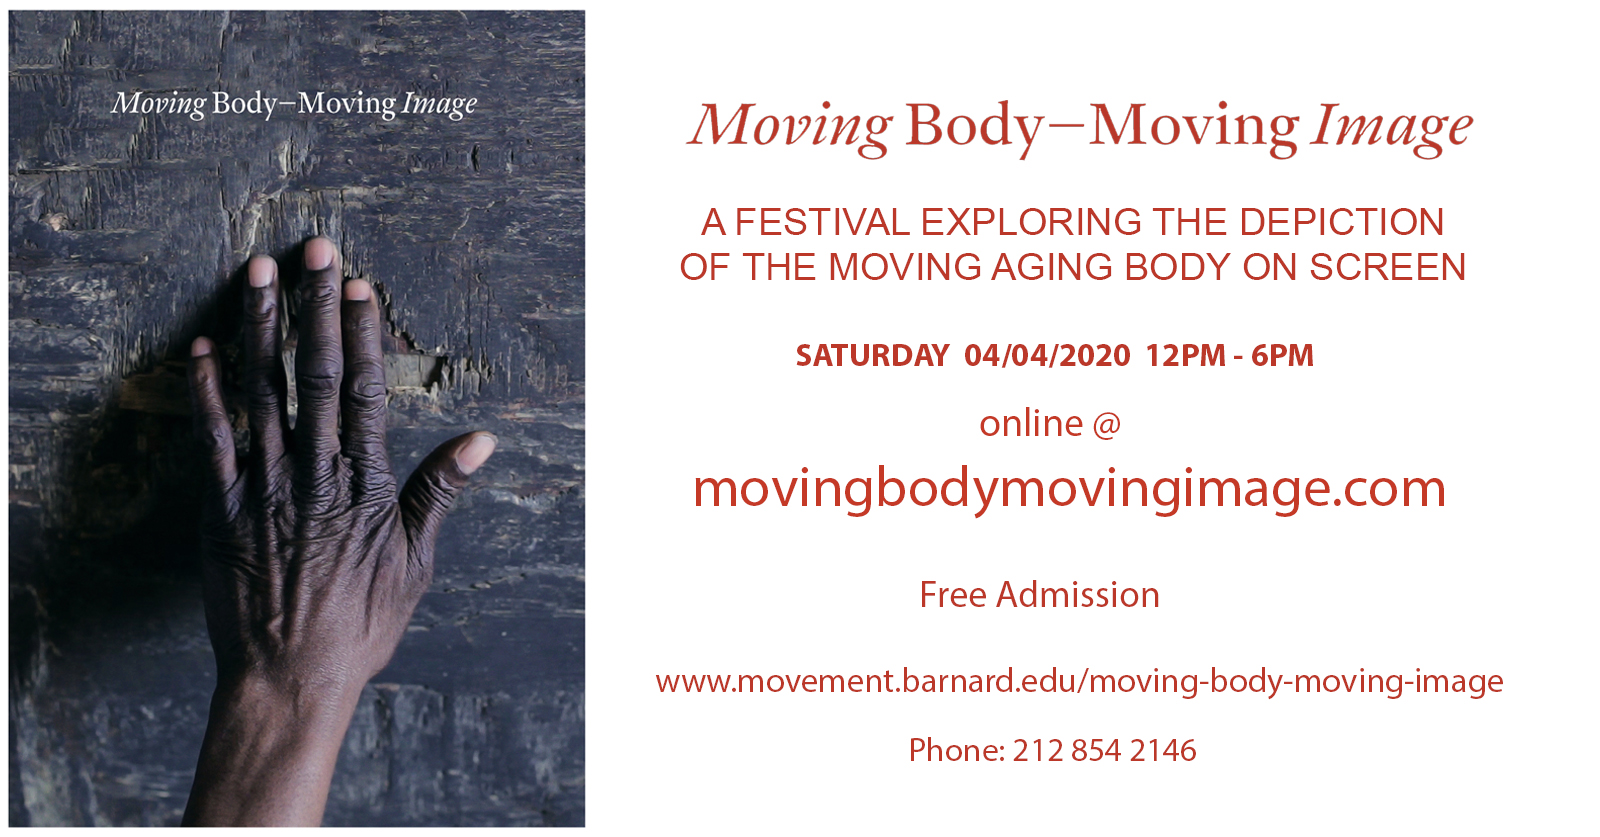 Moving Body Moving Image poster reading "a festival exploring the depiction of the moving aging body on screen. Saturday 04/04 12-6pm online at movingbodymovingimage.com. Free admission. 